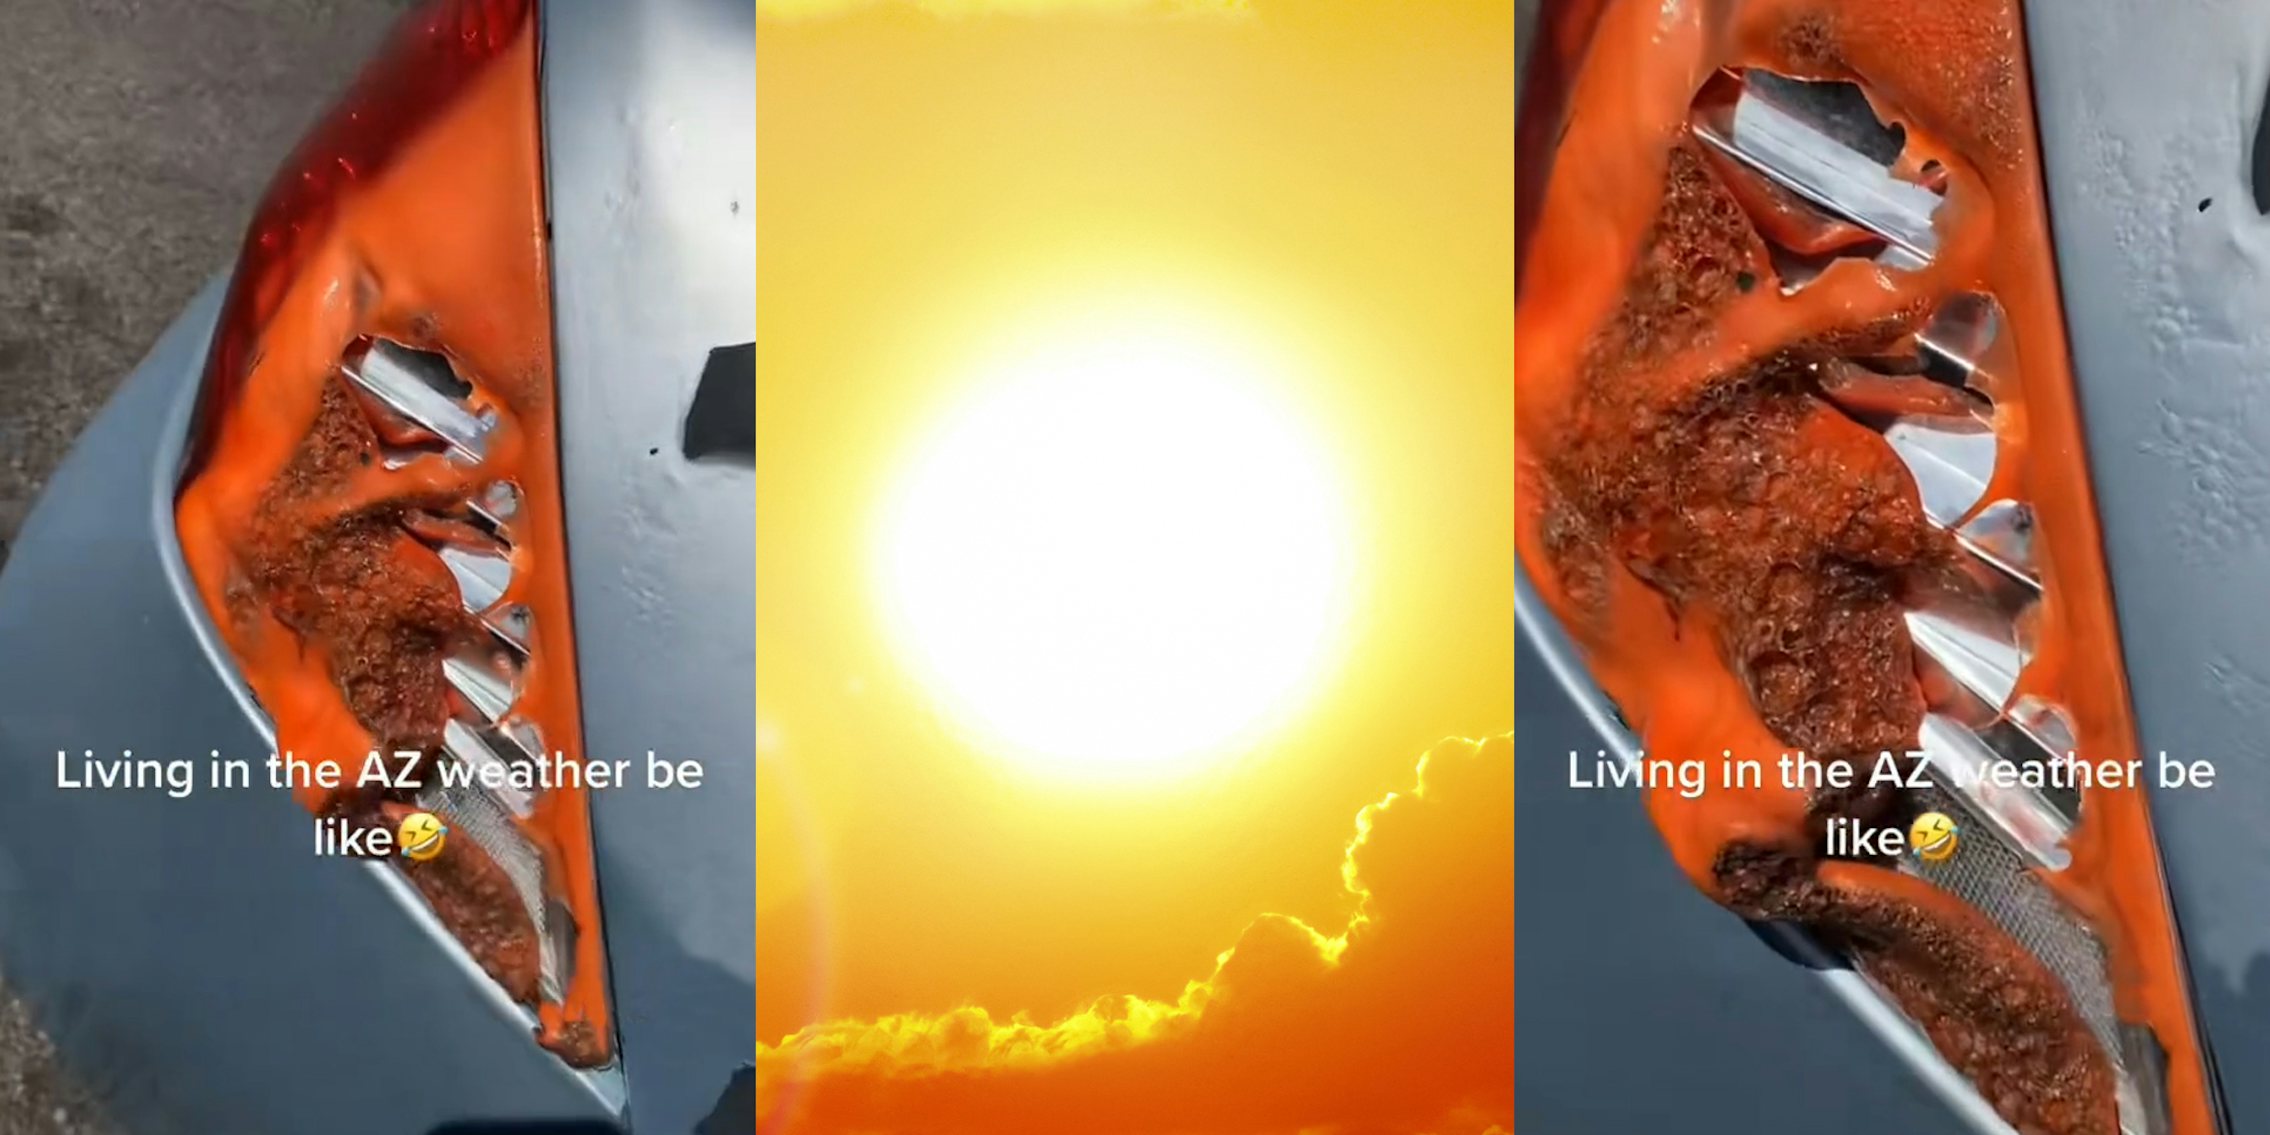 headlight melted with caption 'Living in the AZ weather be like' (l) sun in sky (c) headlight melted up close with caption 'Living in the AZ weather be like' (r)